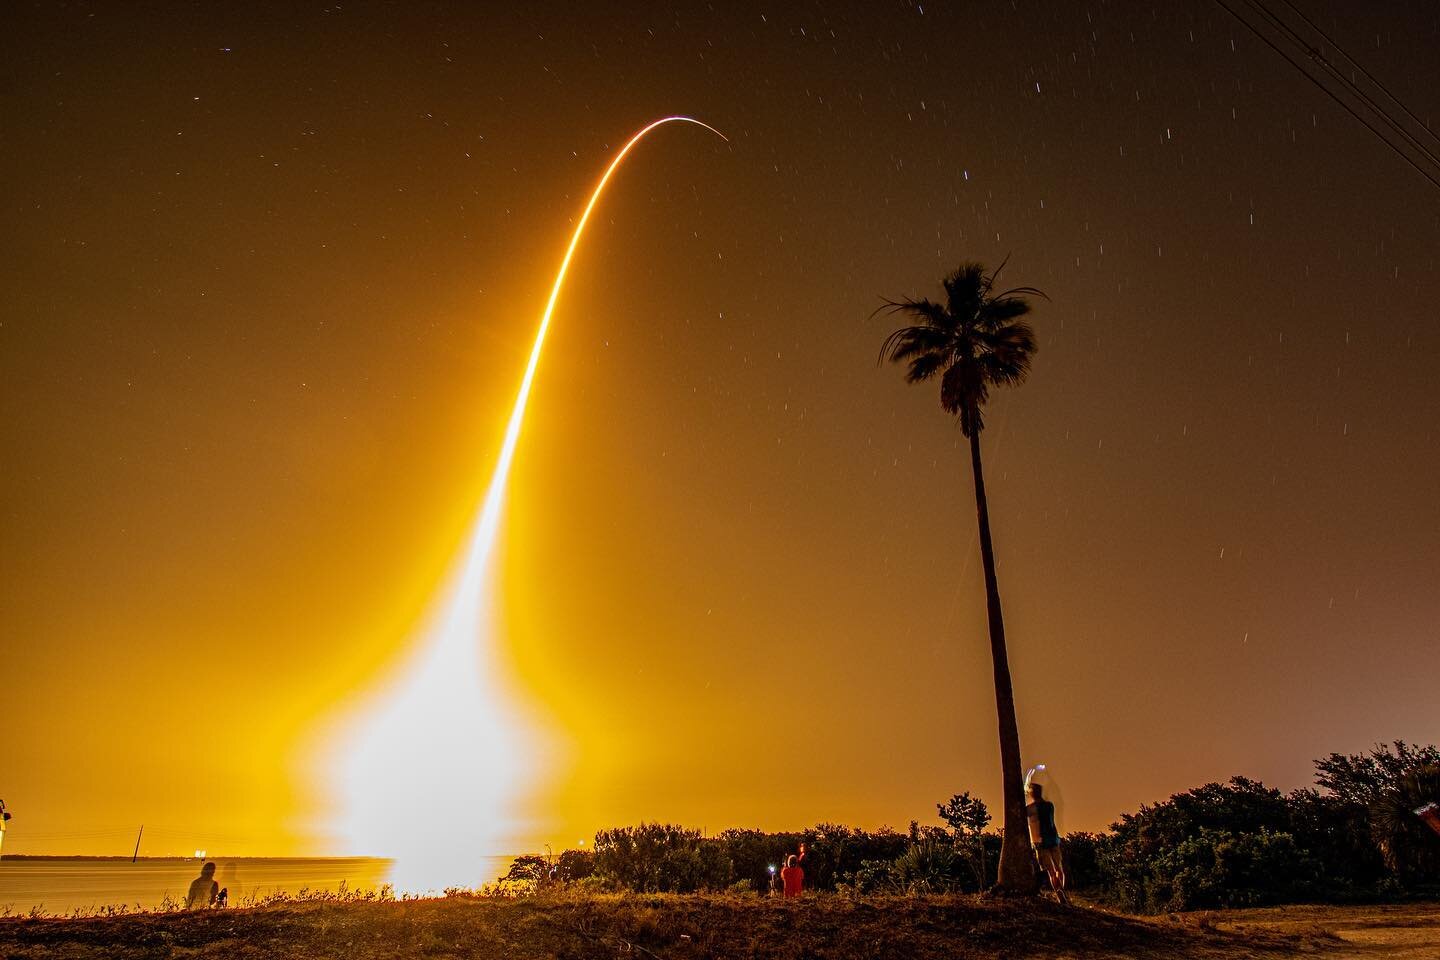 Here&rsquo;s an overblown
Long-exposure photo of
SpaceX Crew-4 launch 🚀 

#haiku #haikutoyoutoo #rocketlaunchhaiku ⁣
.⁣
.⁣
.⁣
.⁣
.⁣
.⁣
.⁣
.⁣
.⁣
.⁣
#nasa #nasa🚀 #rocket #rocketlaunch #rockets #astrophotography #space #spaceart #spaceship #spaceshutt